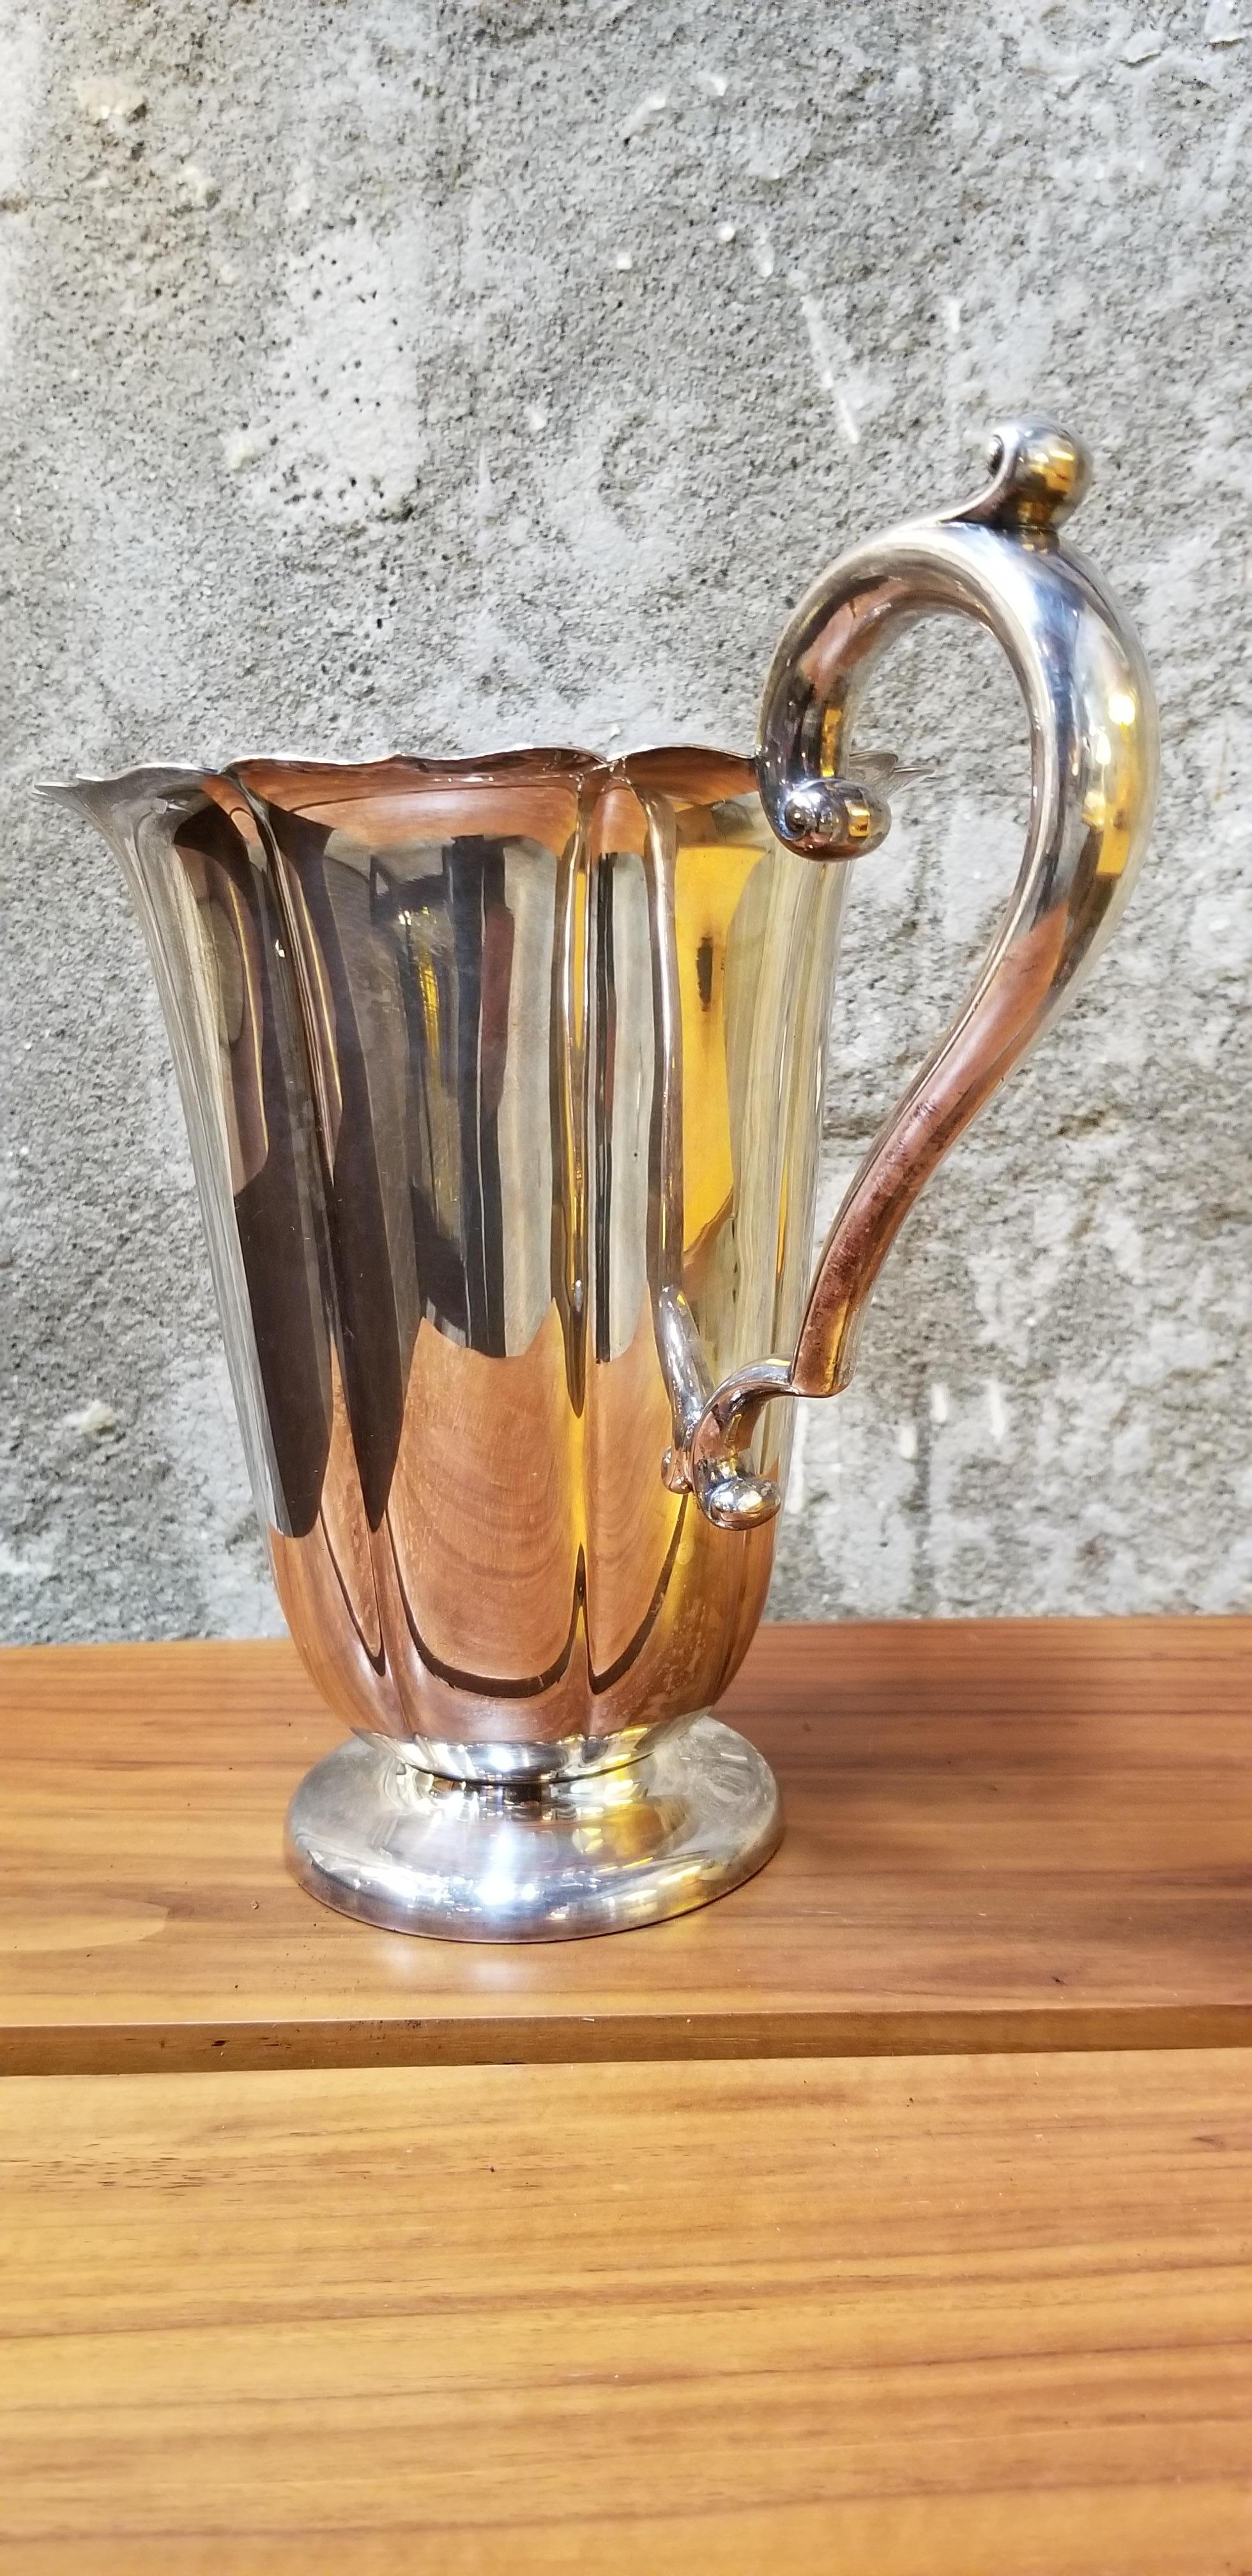 Meriden & Co. Silver Plate Pitcher In Good Condition For Sale In Fulton, CA